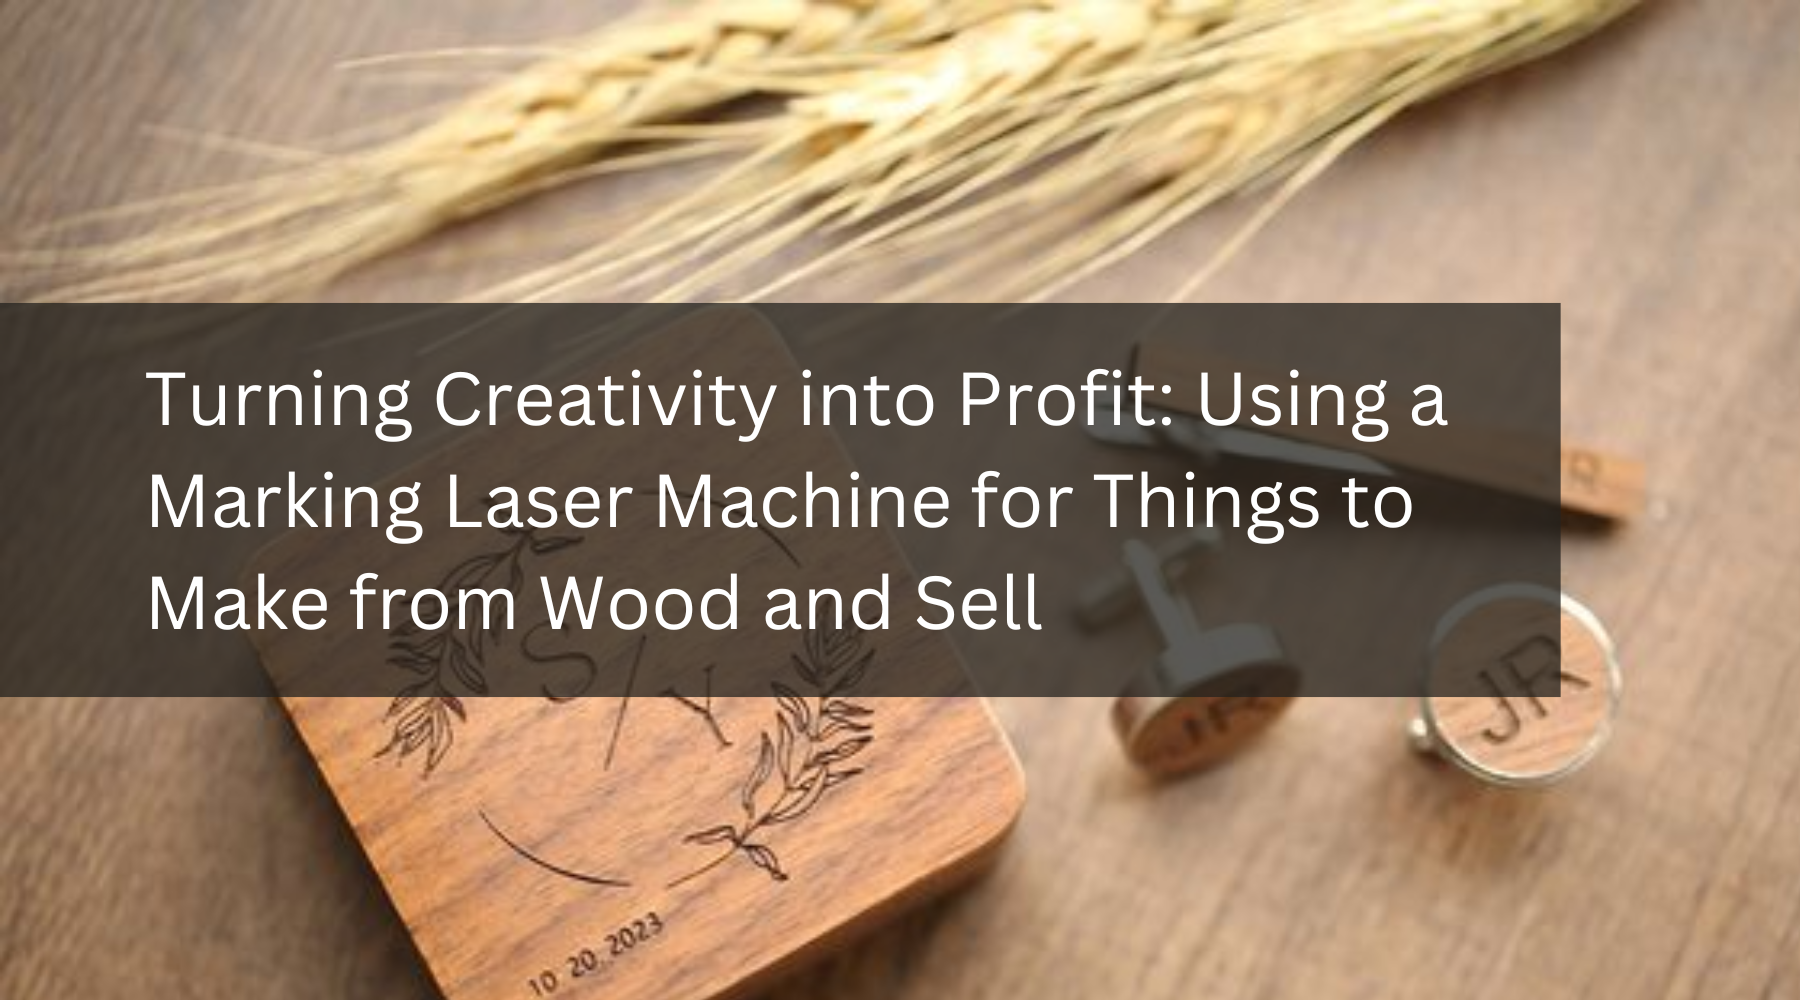 Turning Creativity into Profit: Using a Marking Laser Machine for Things to Make from Wood and Sell